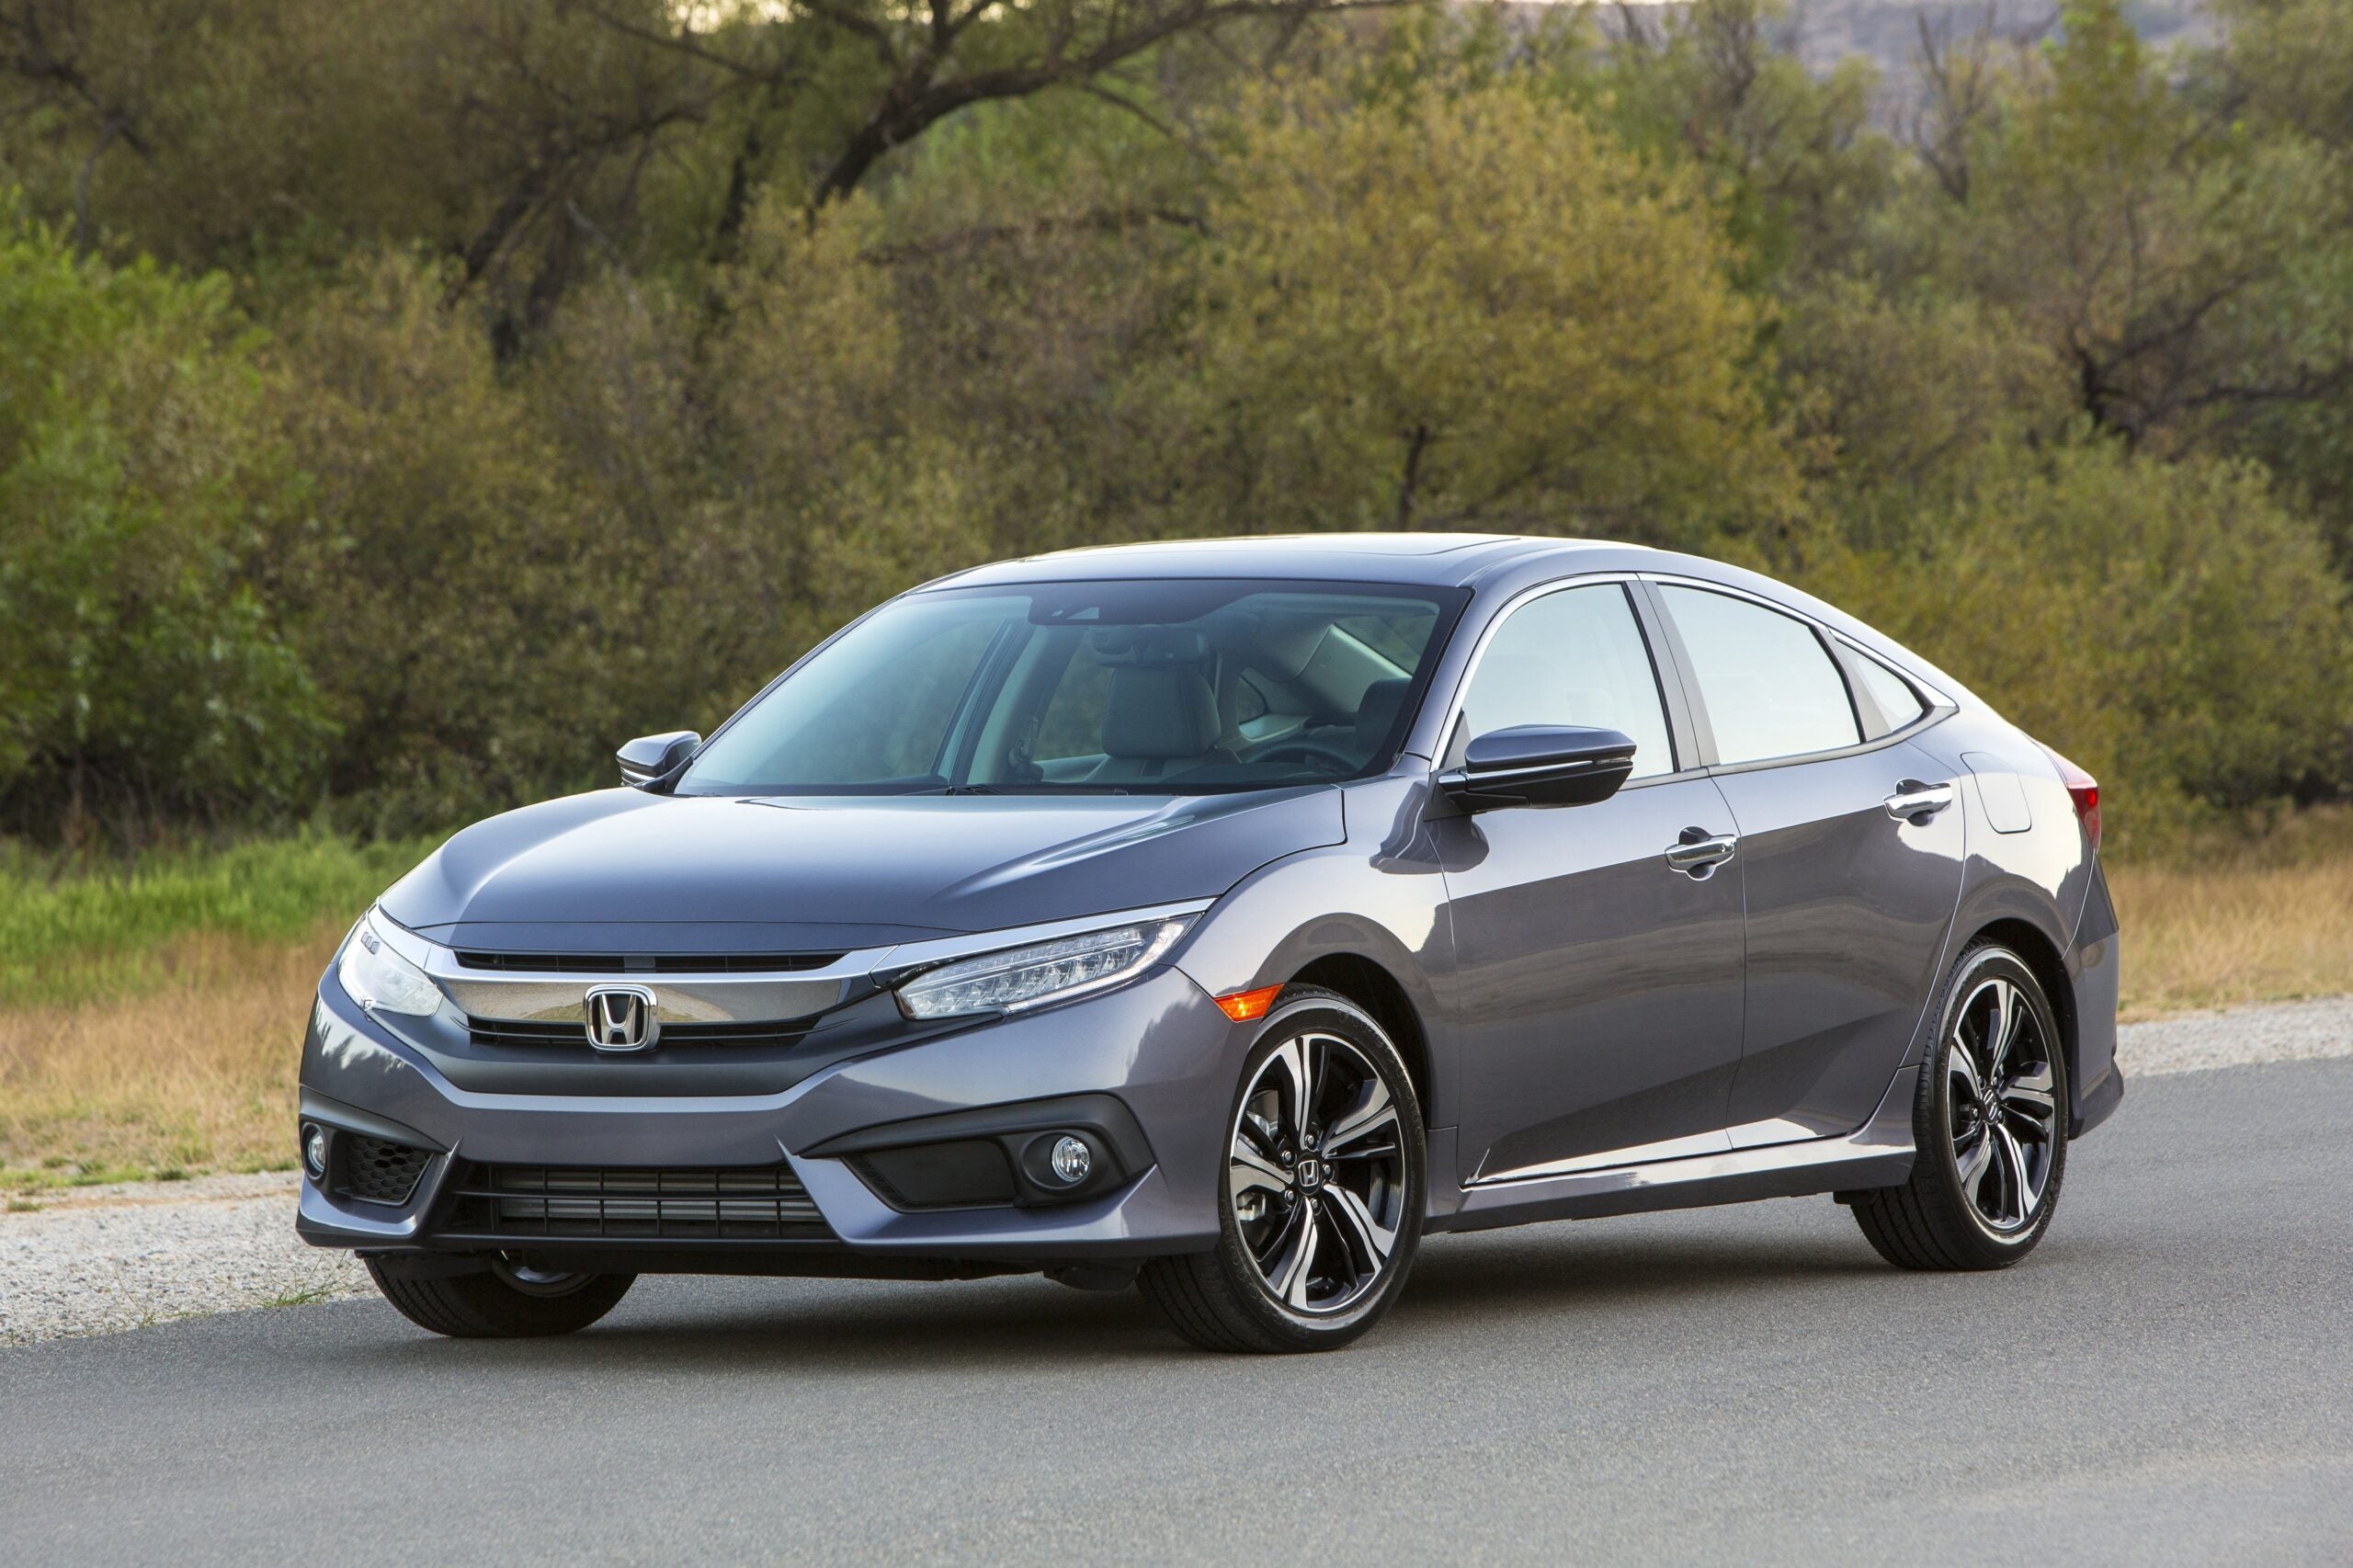 What the experts say about the 2018 Honda Civic